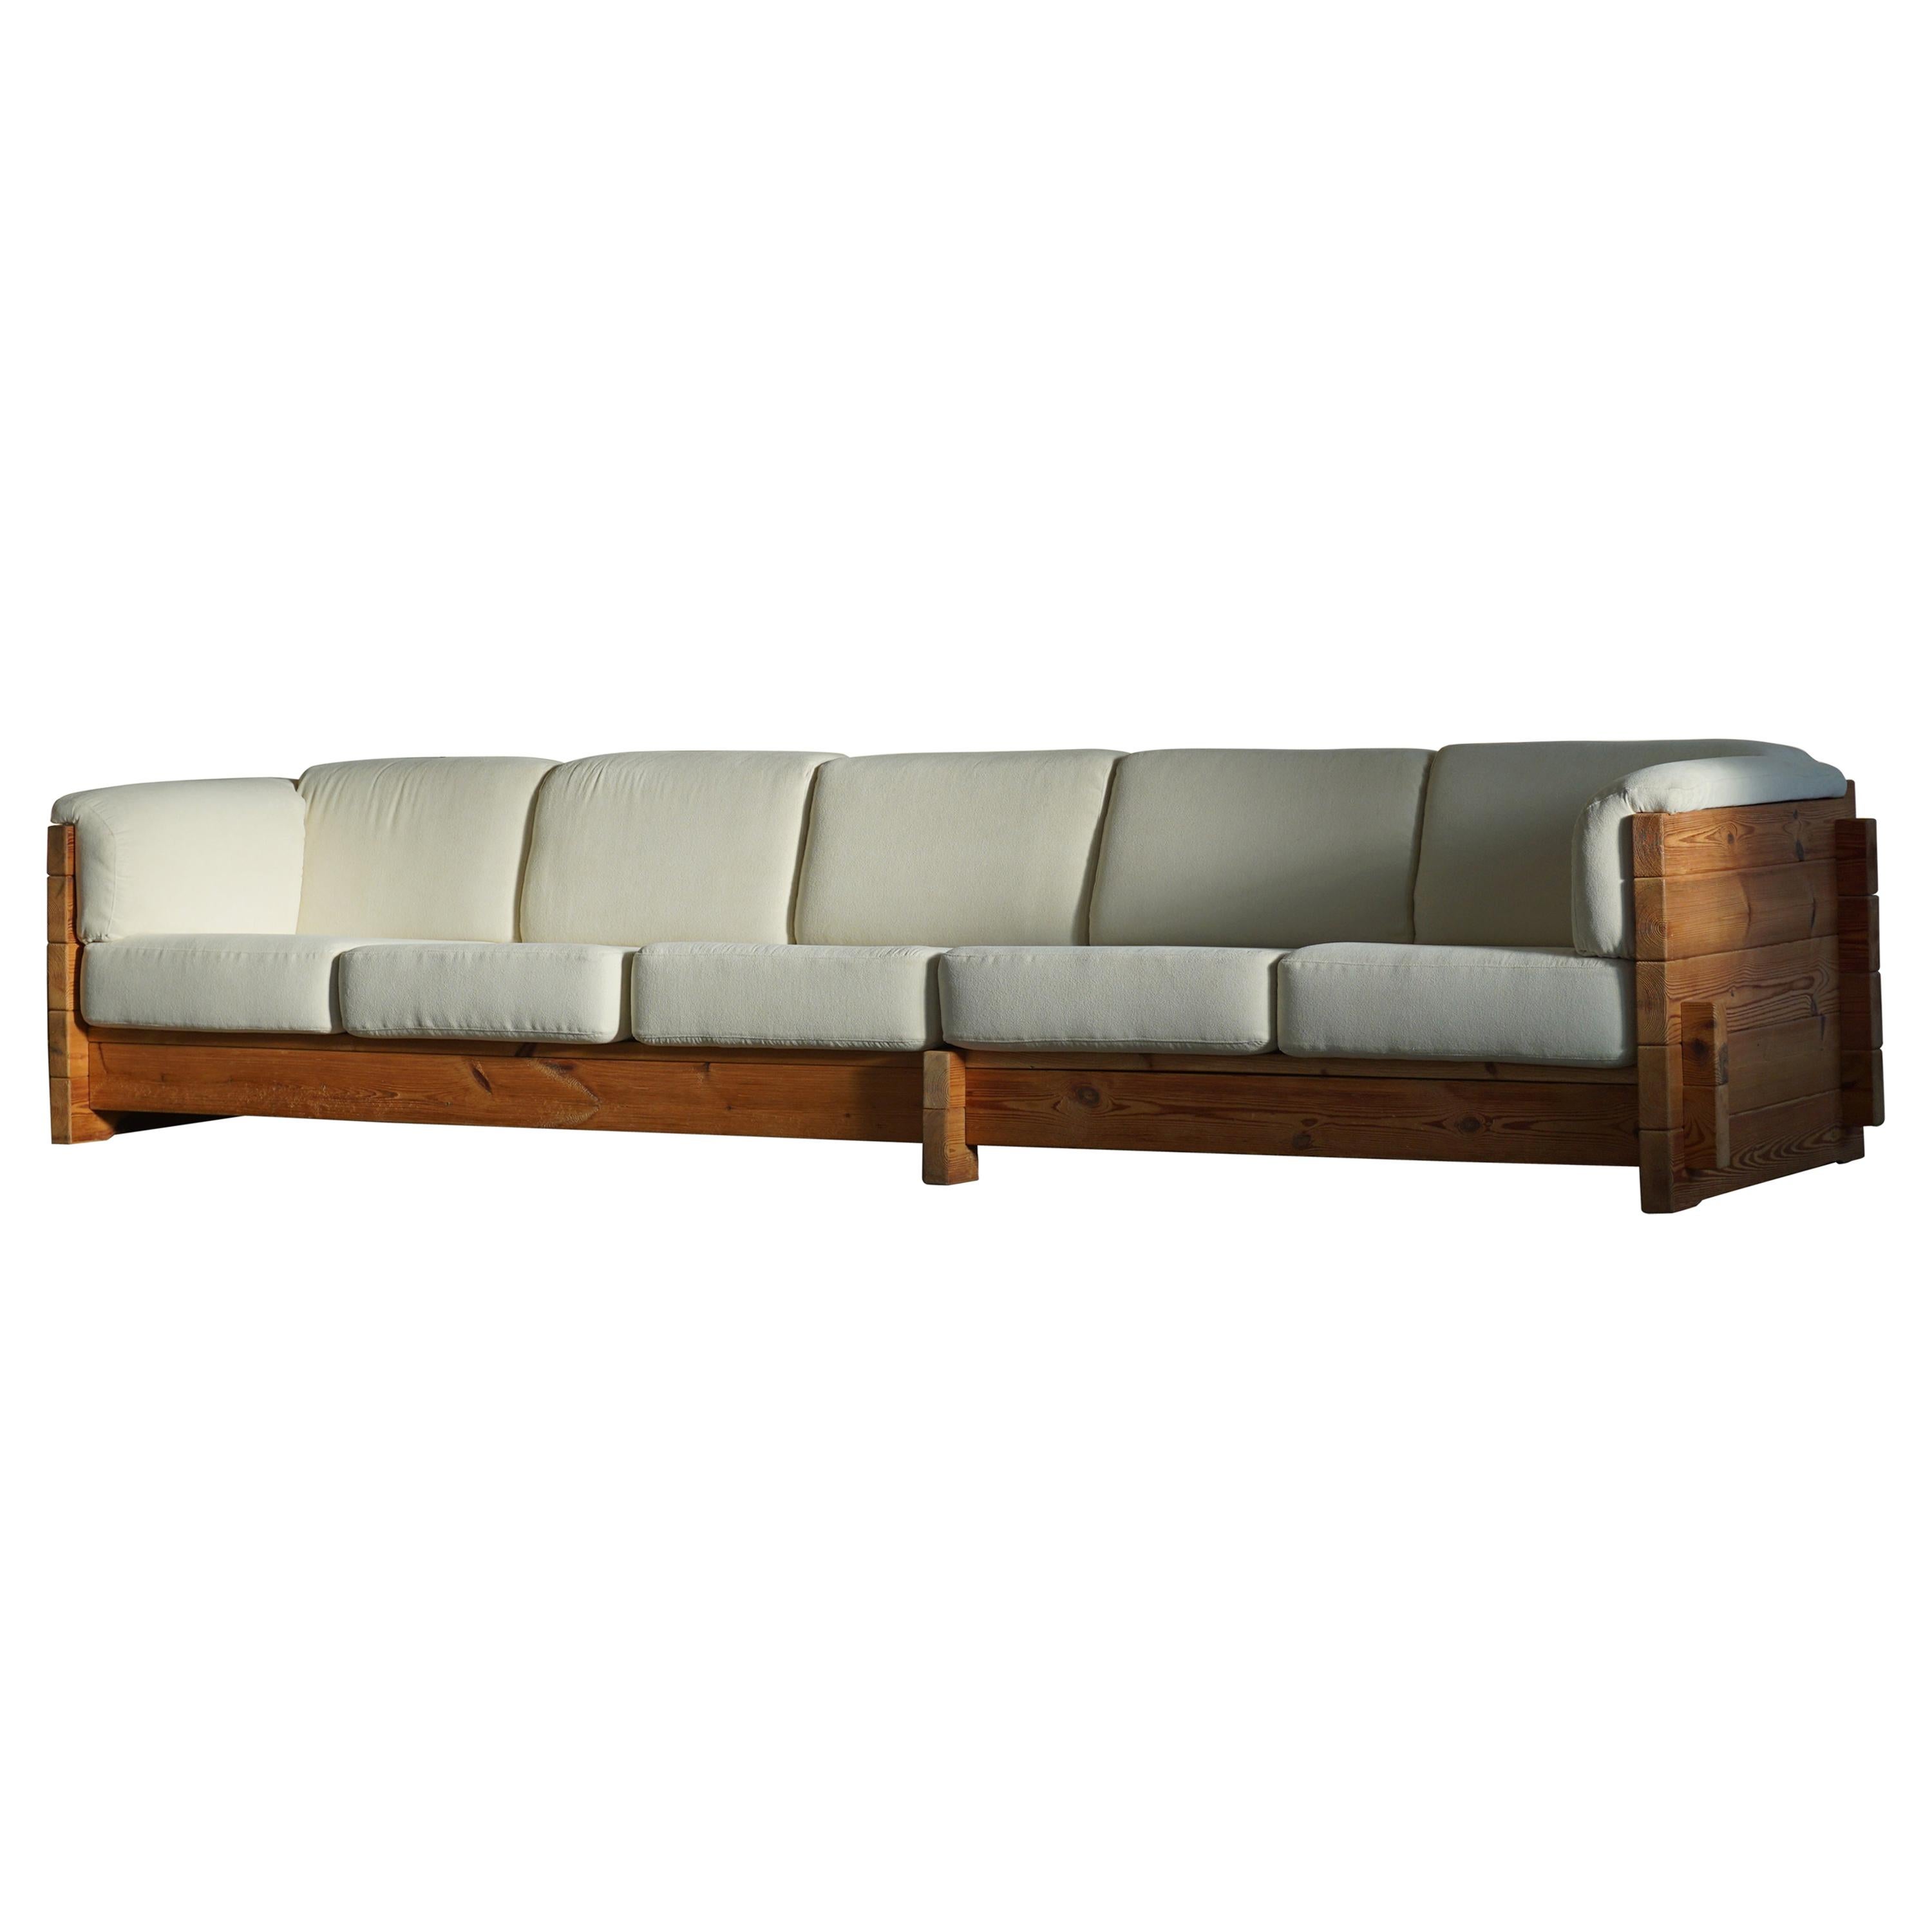 Danish Modern Freestanding Five-Seater Sofa in Pine with New Upholstery, 1970s